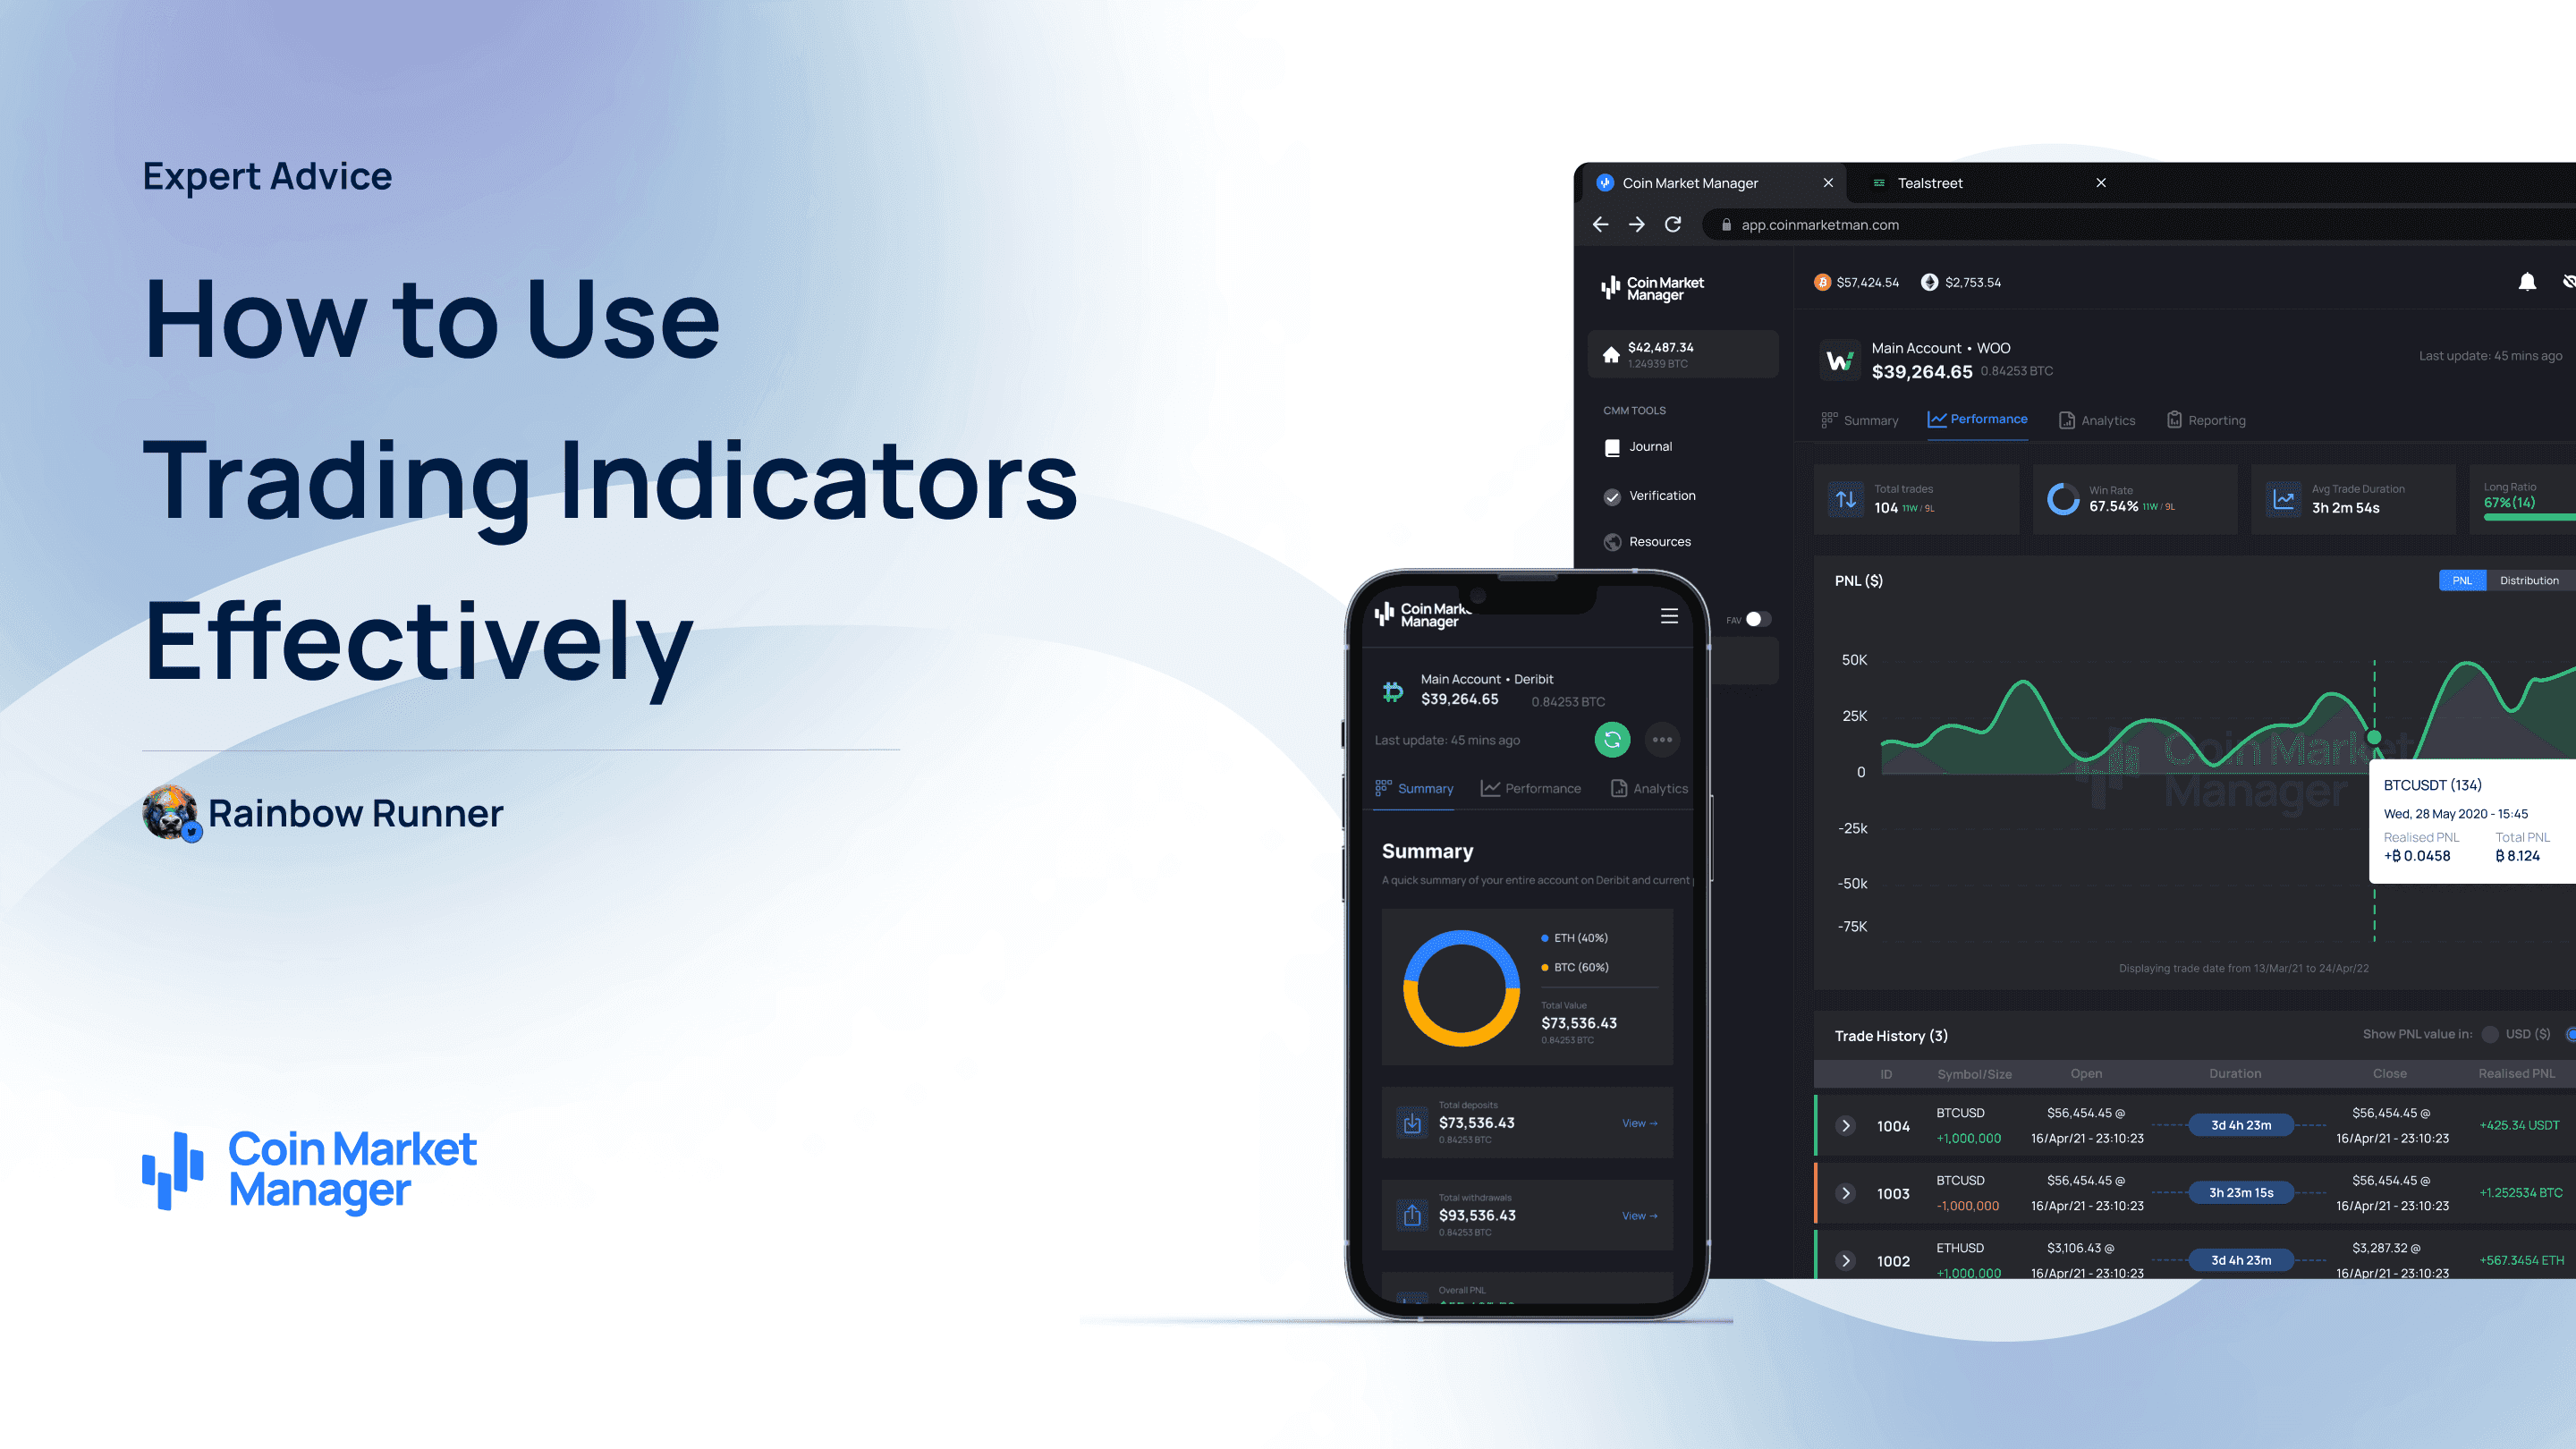 How to Use Trading Indicators Effectively